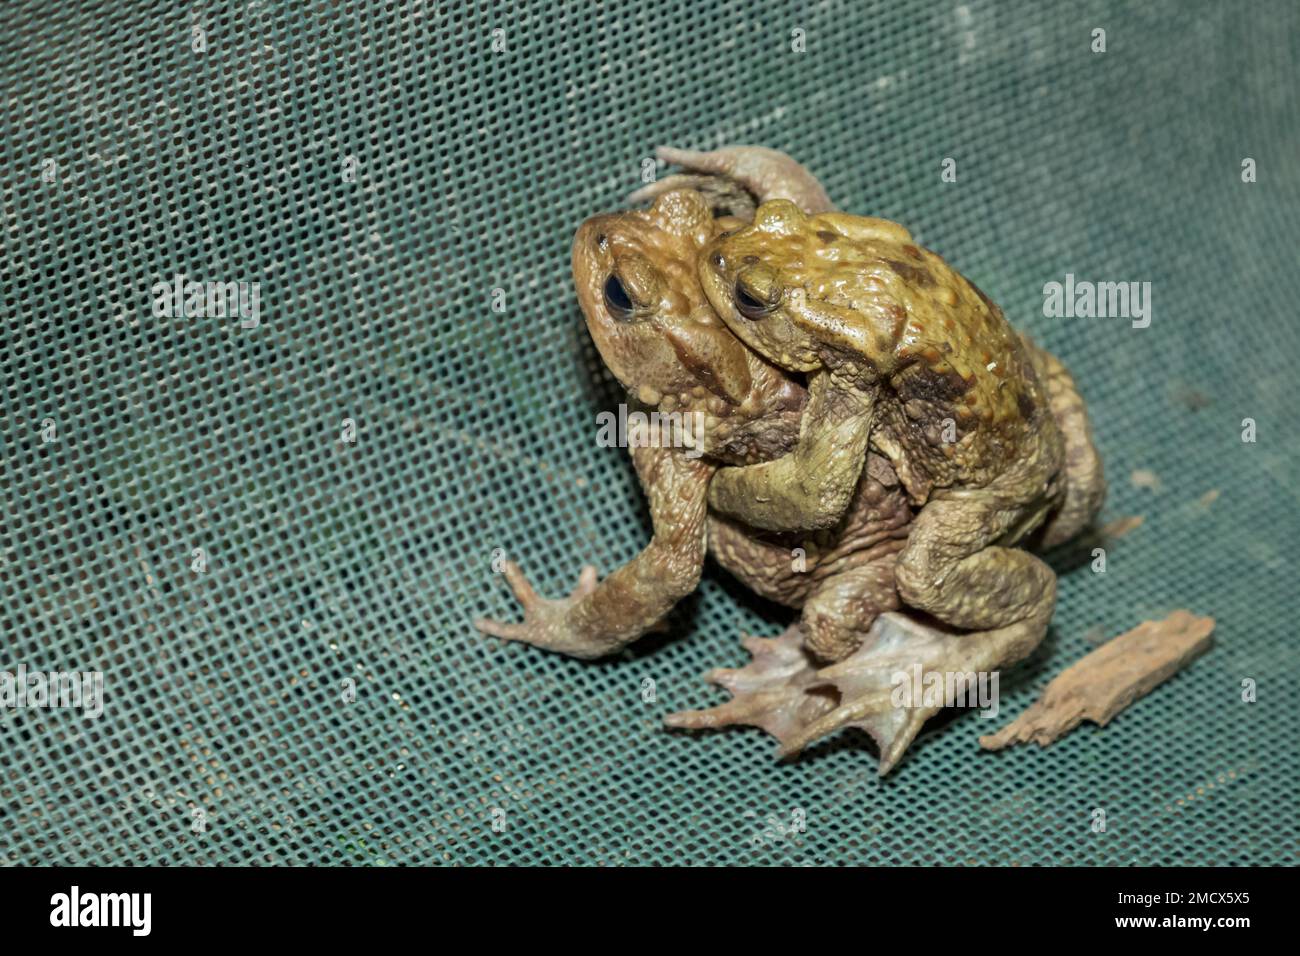 Common toads (Bufo bufo), common toad migration at the Kela pond near Limsenegg in Ruggell, Liechtenstein Stock Photo